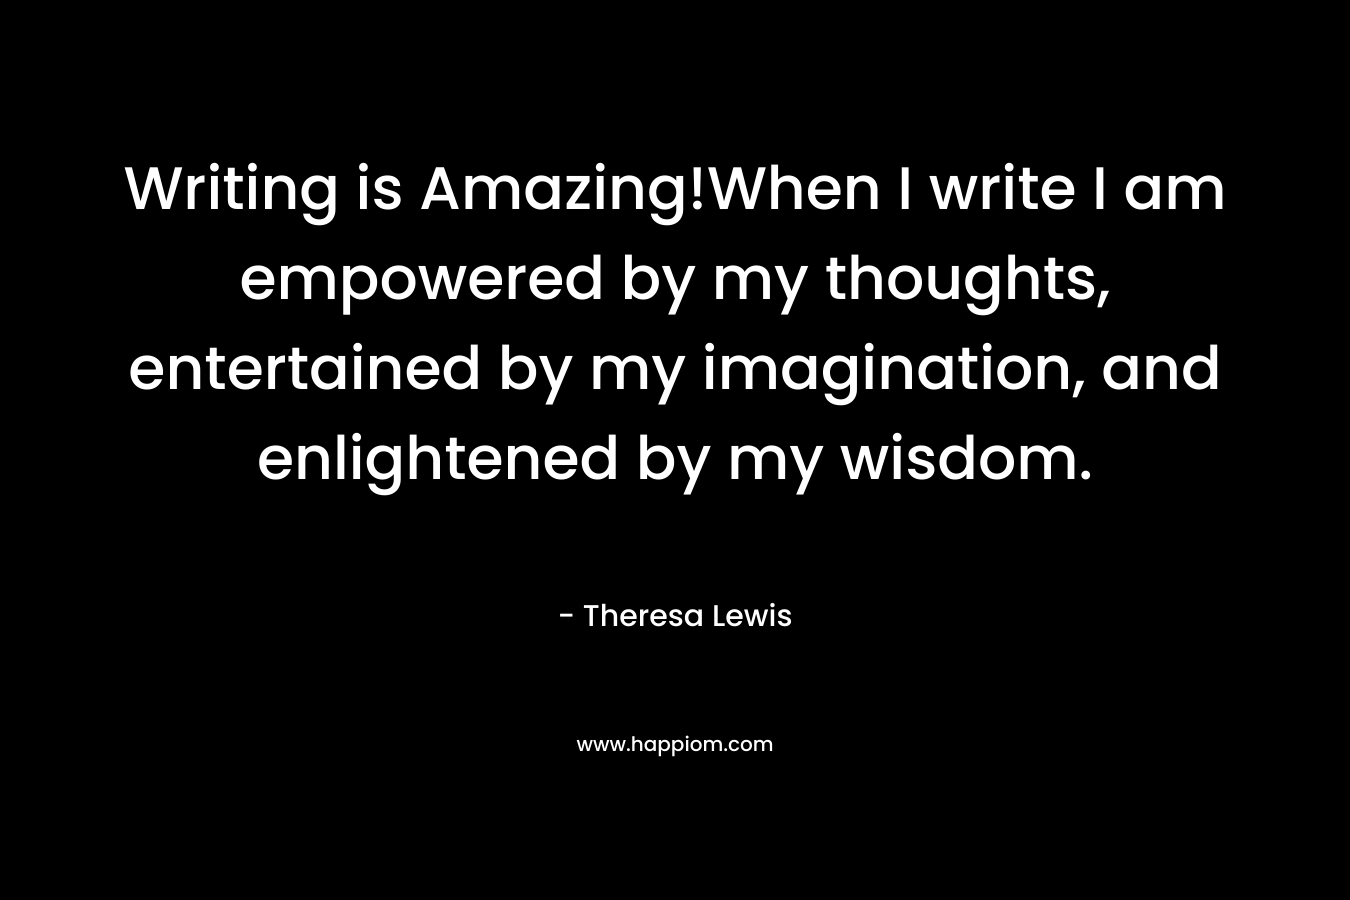 Writing is Amazing!When I write I am empowered by my thoughts, entertained by my imagination, and enlightened by my wisdom.